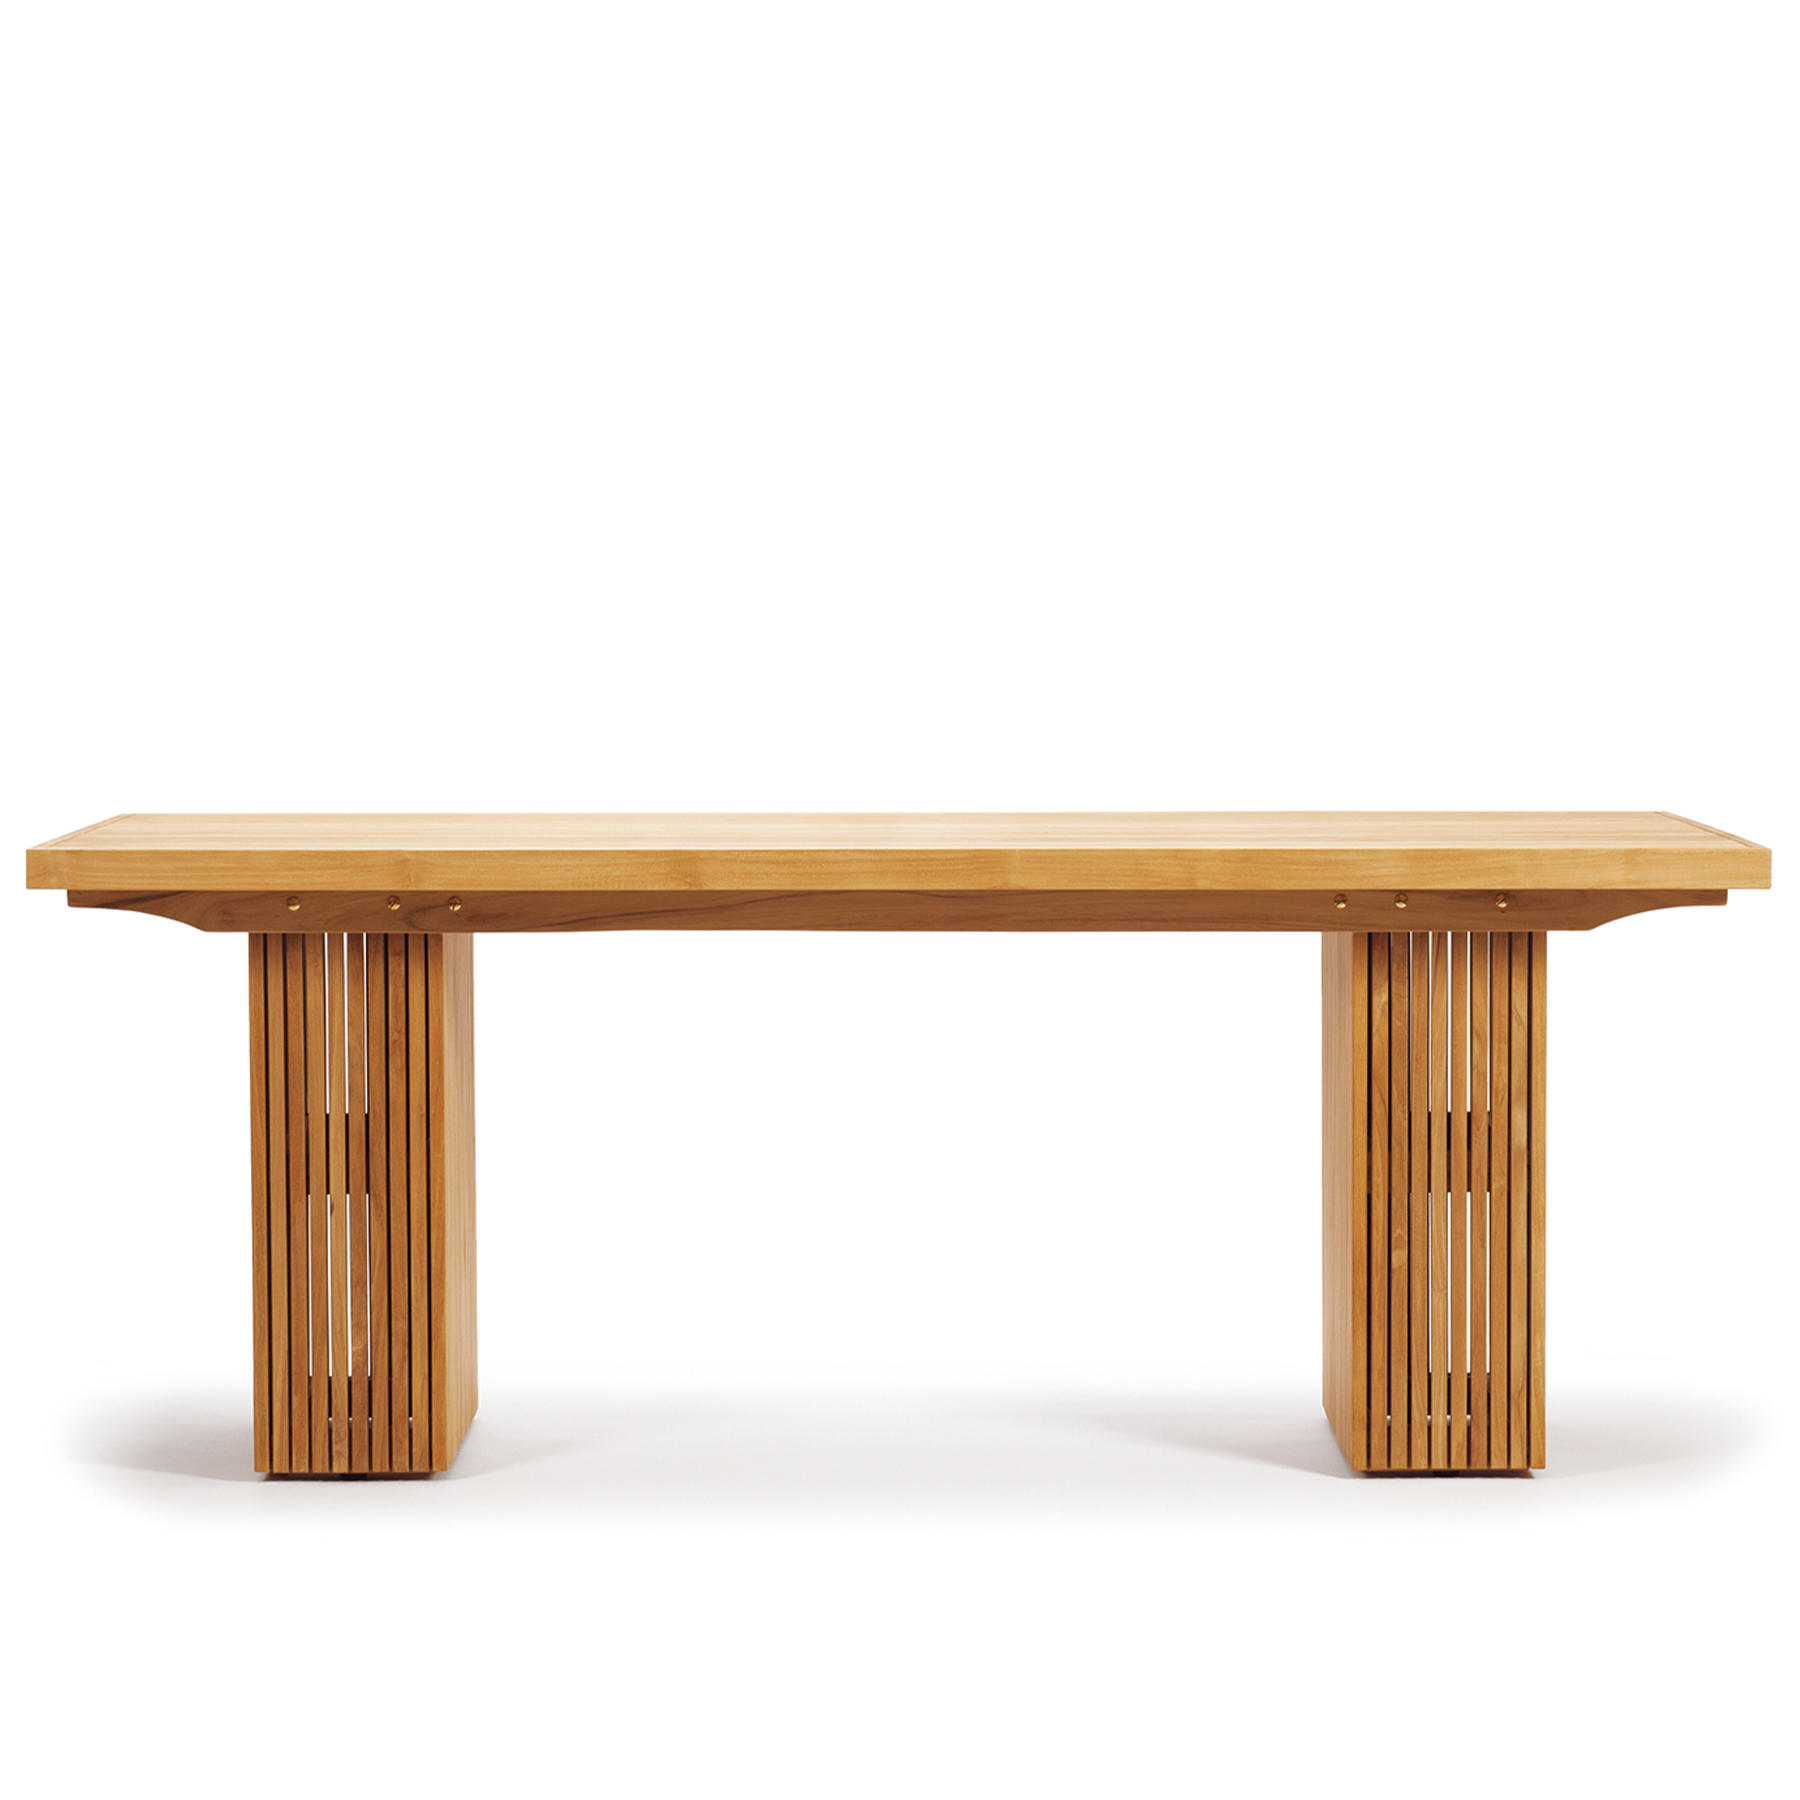 LINER DINING TABLE - 【ASPLUND CONTRACT】 アスプルンド コントラクト